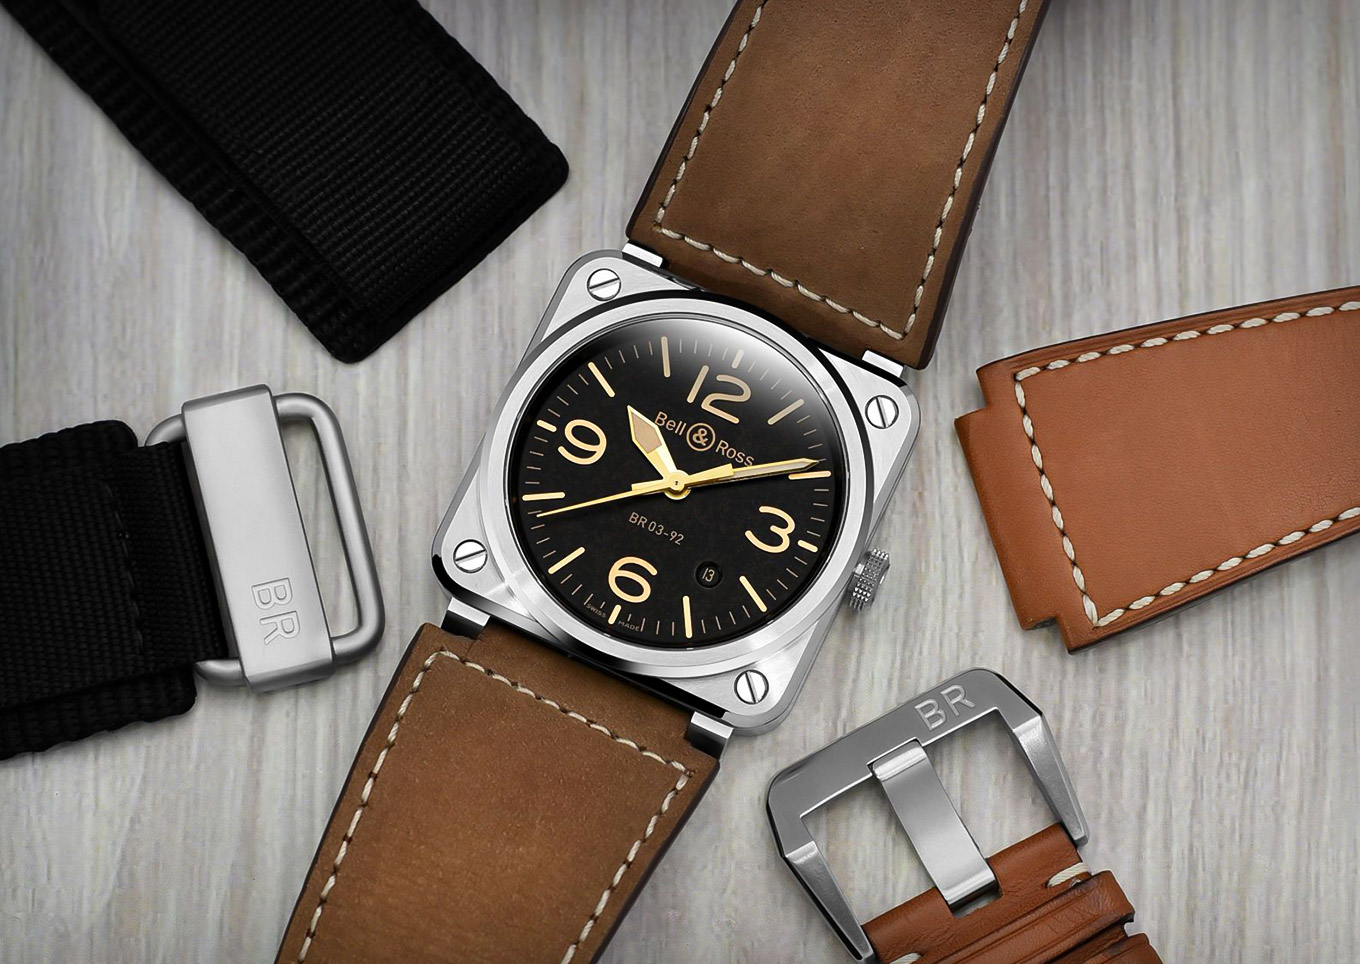 Square watches of Bell & Ross